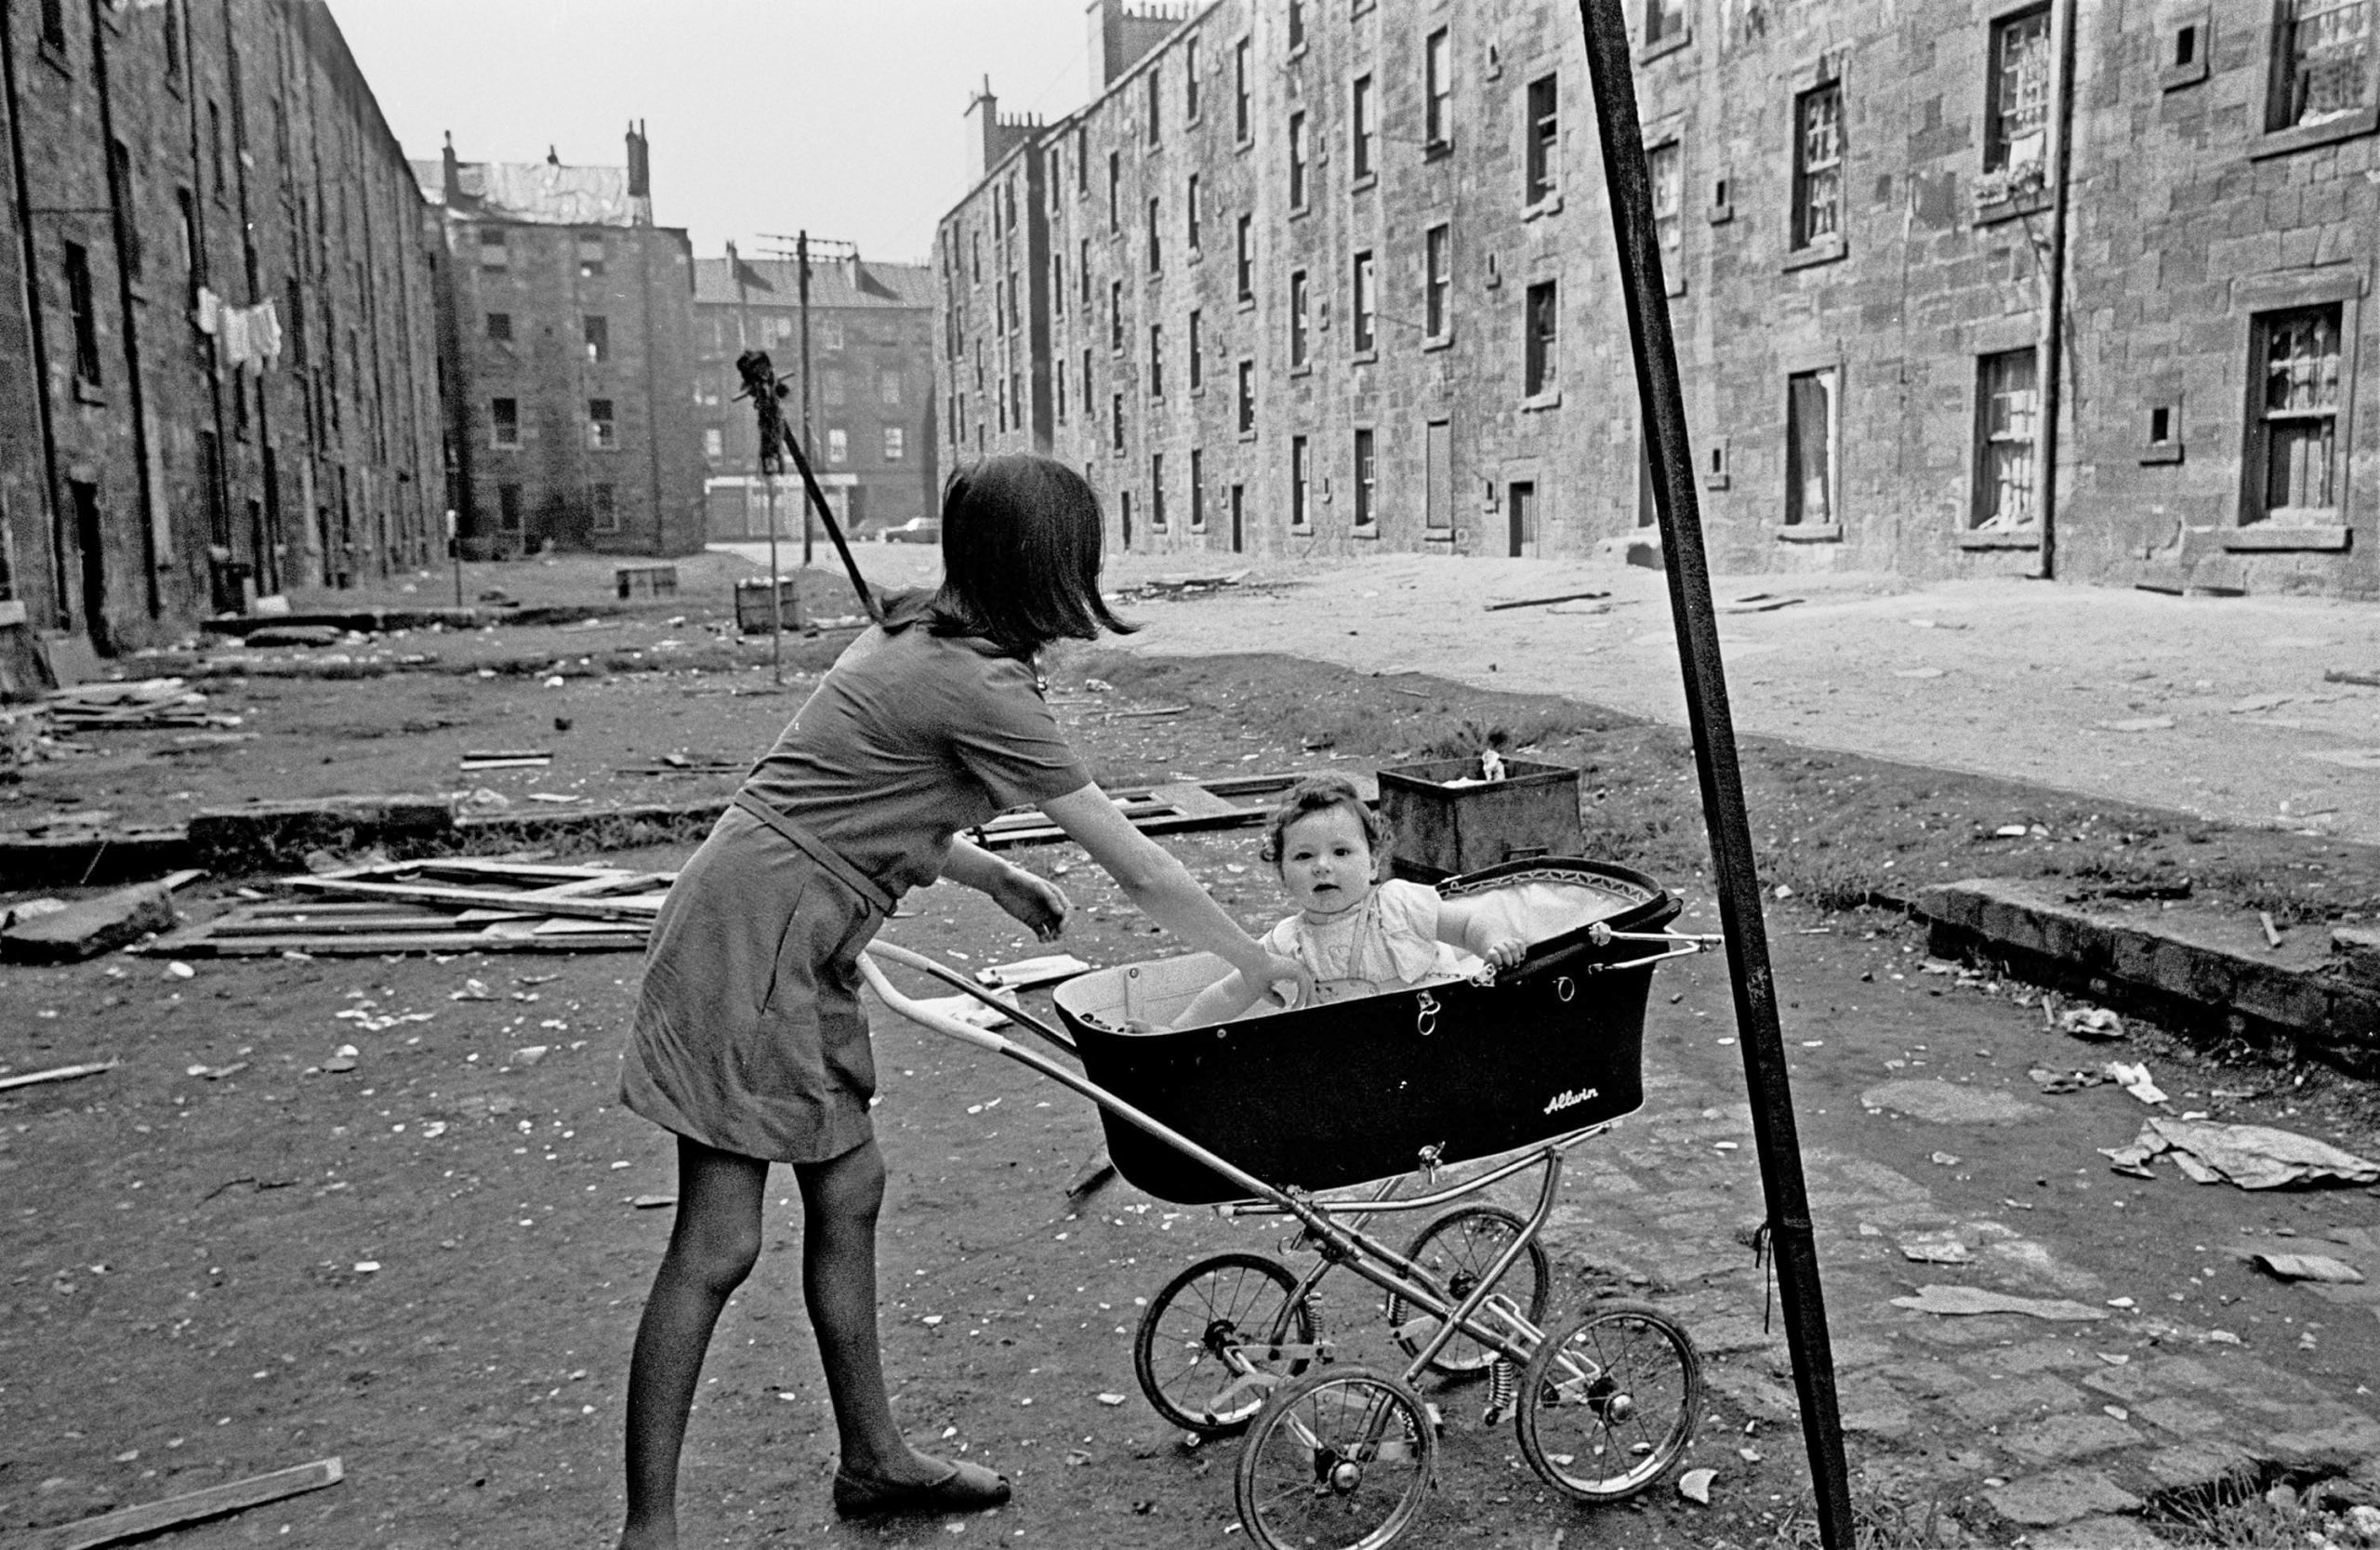 The photographer who captured Britain’s slum housing crisis in the ‘60s